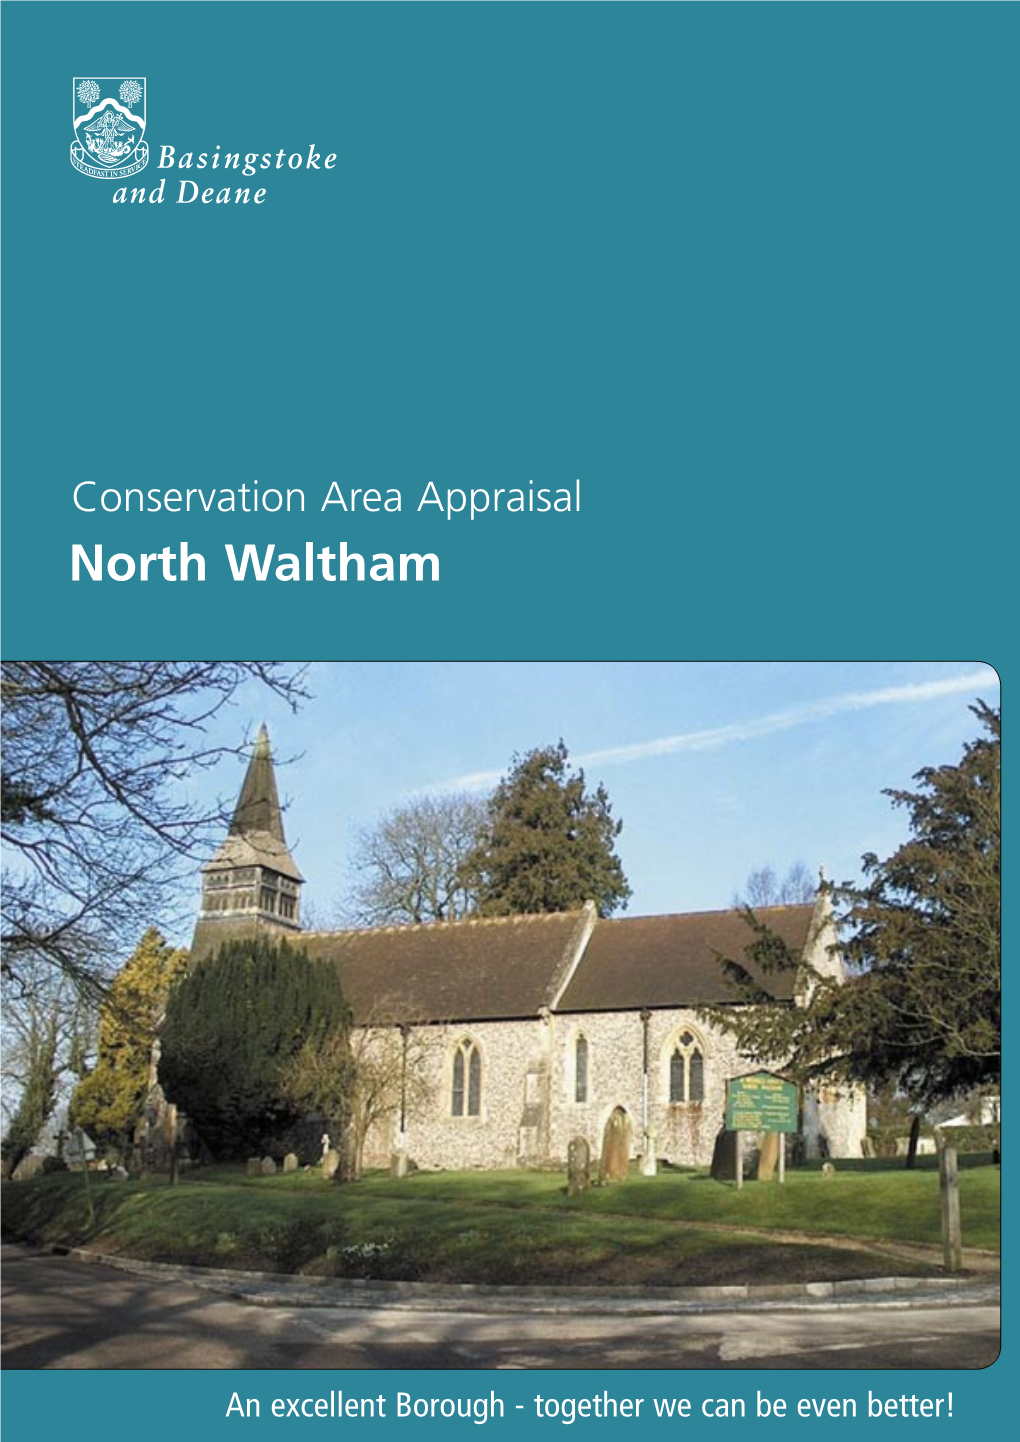 North Waltham Conservation Area Appraisal